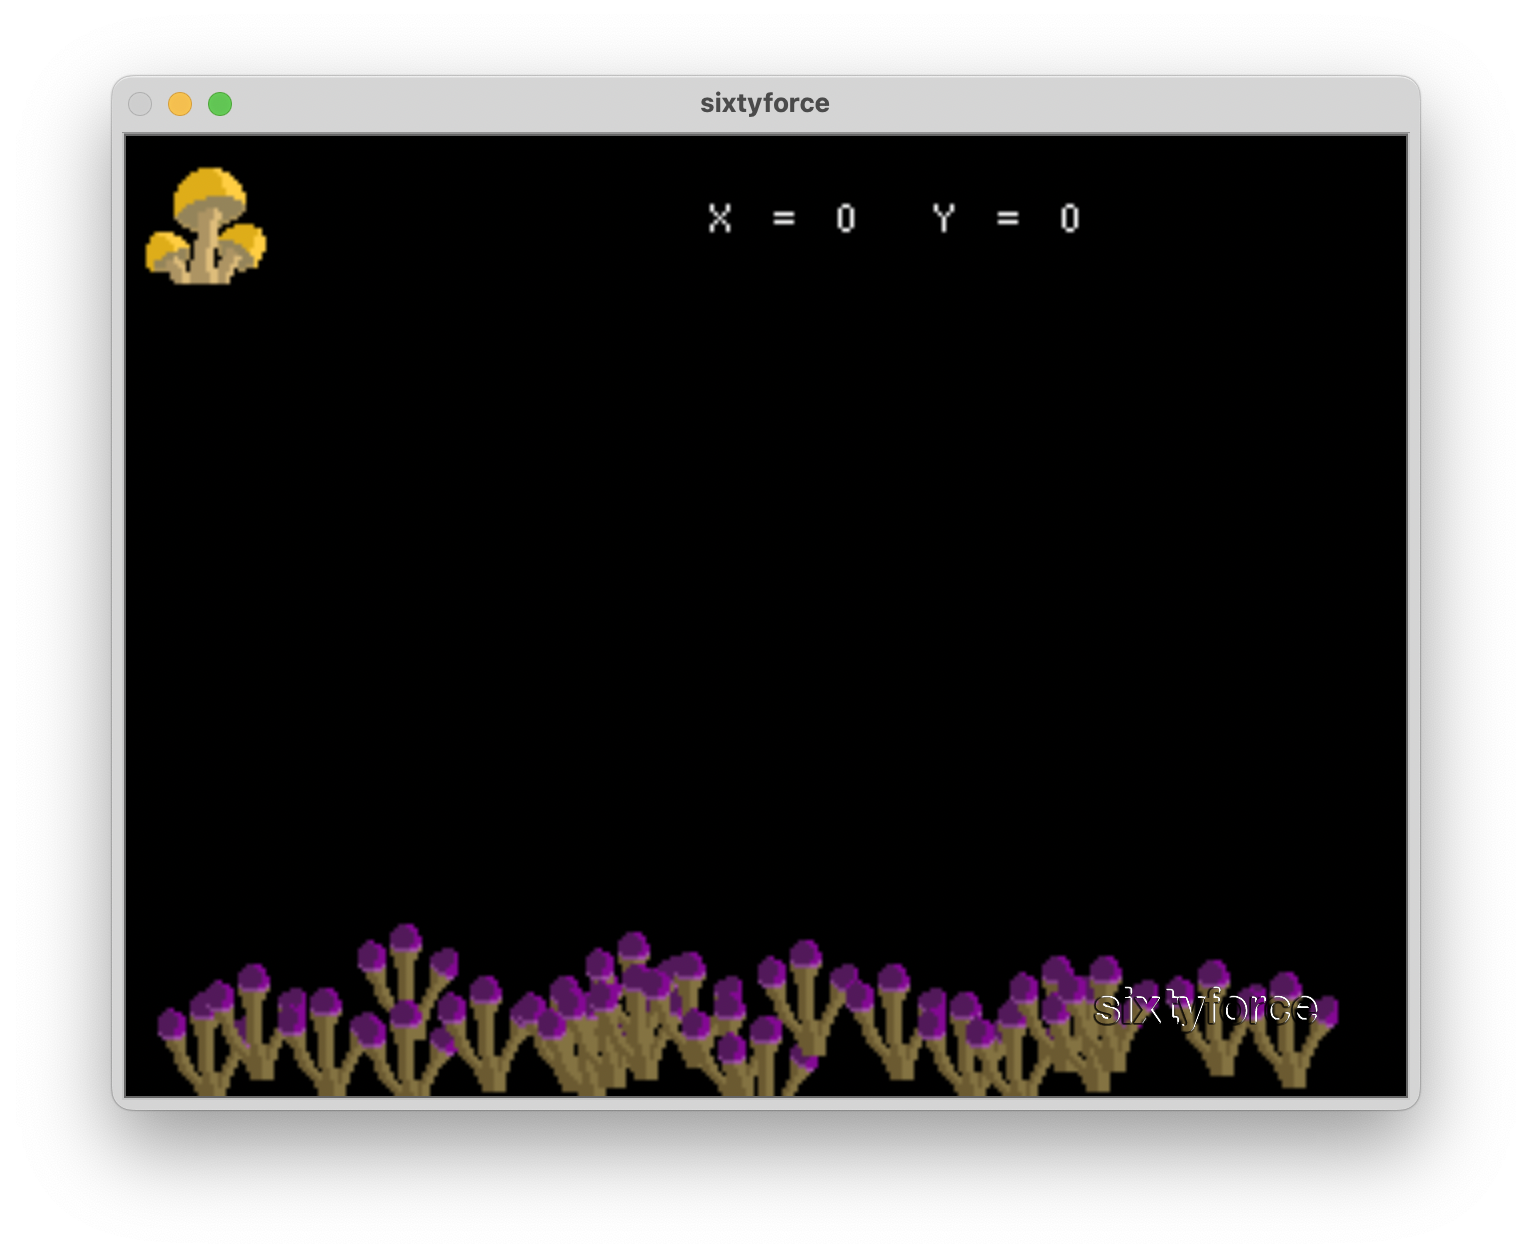 A picture of the ROM running in an emulator. There are orange mushrooms lining the bottom of the screen, a yellow mushroom in the top-left corner, and the text "X = 0 Y = 0" appears to the centre-left of the screen.